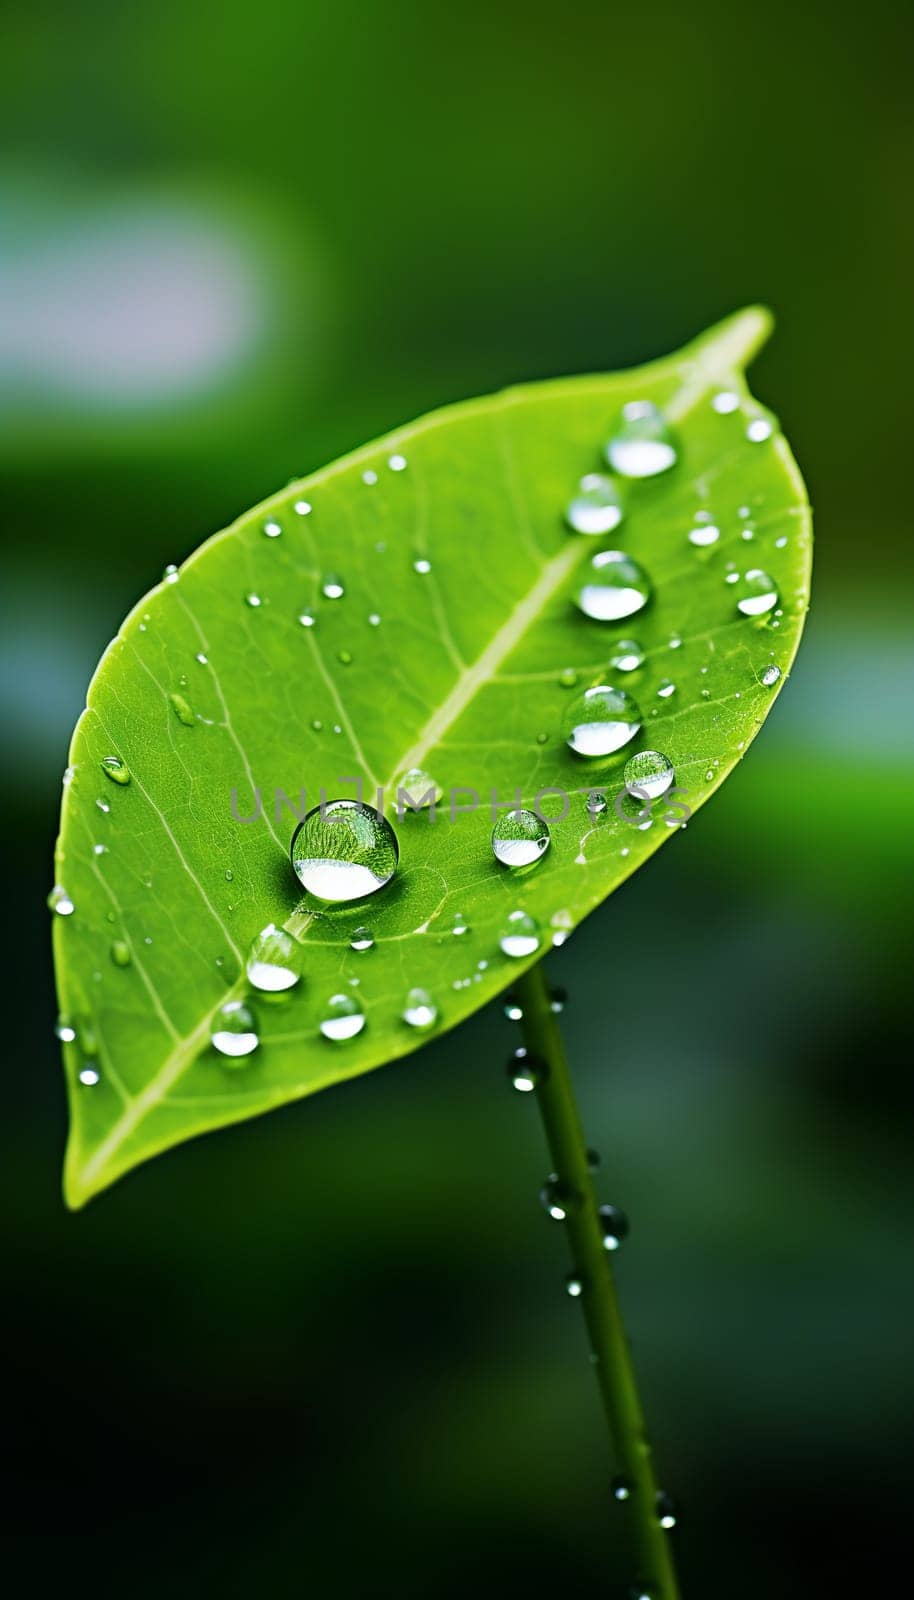  Water is Life , Water Drop on Leaf with green background Generate AI by Mrsongrphc